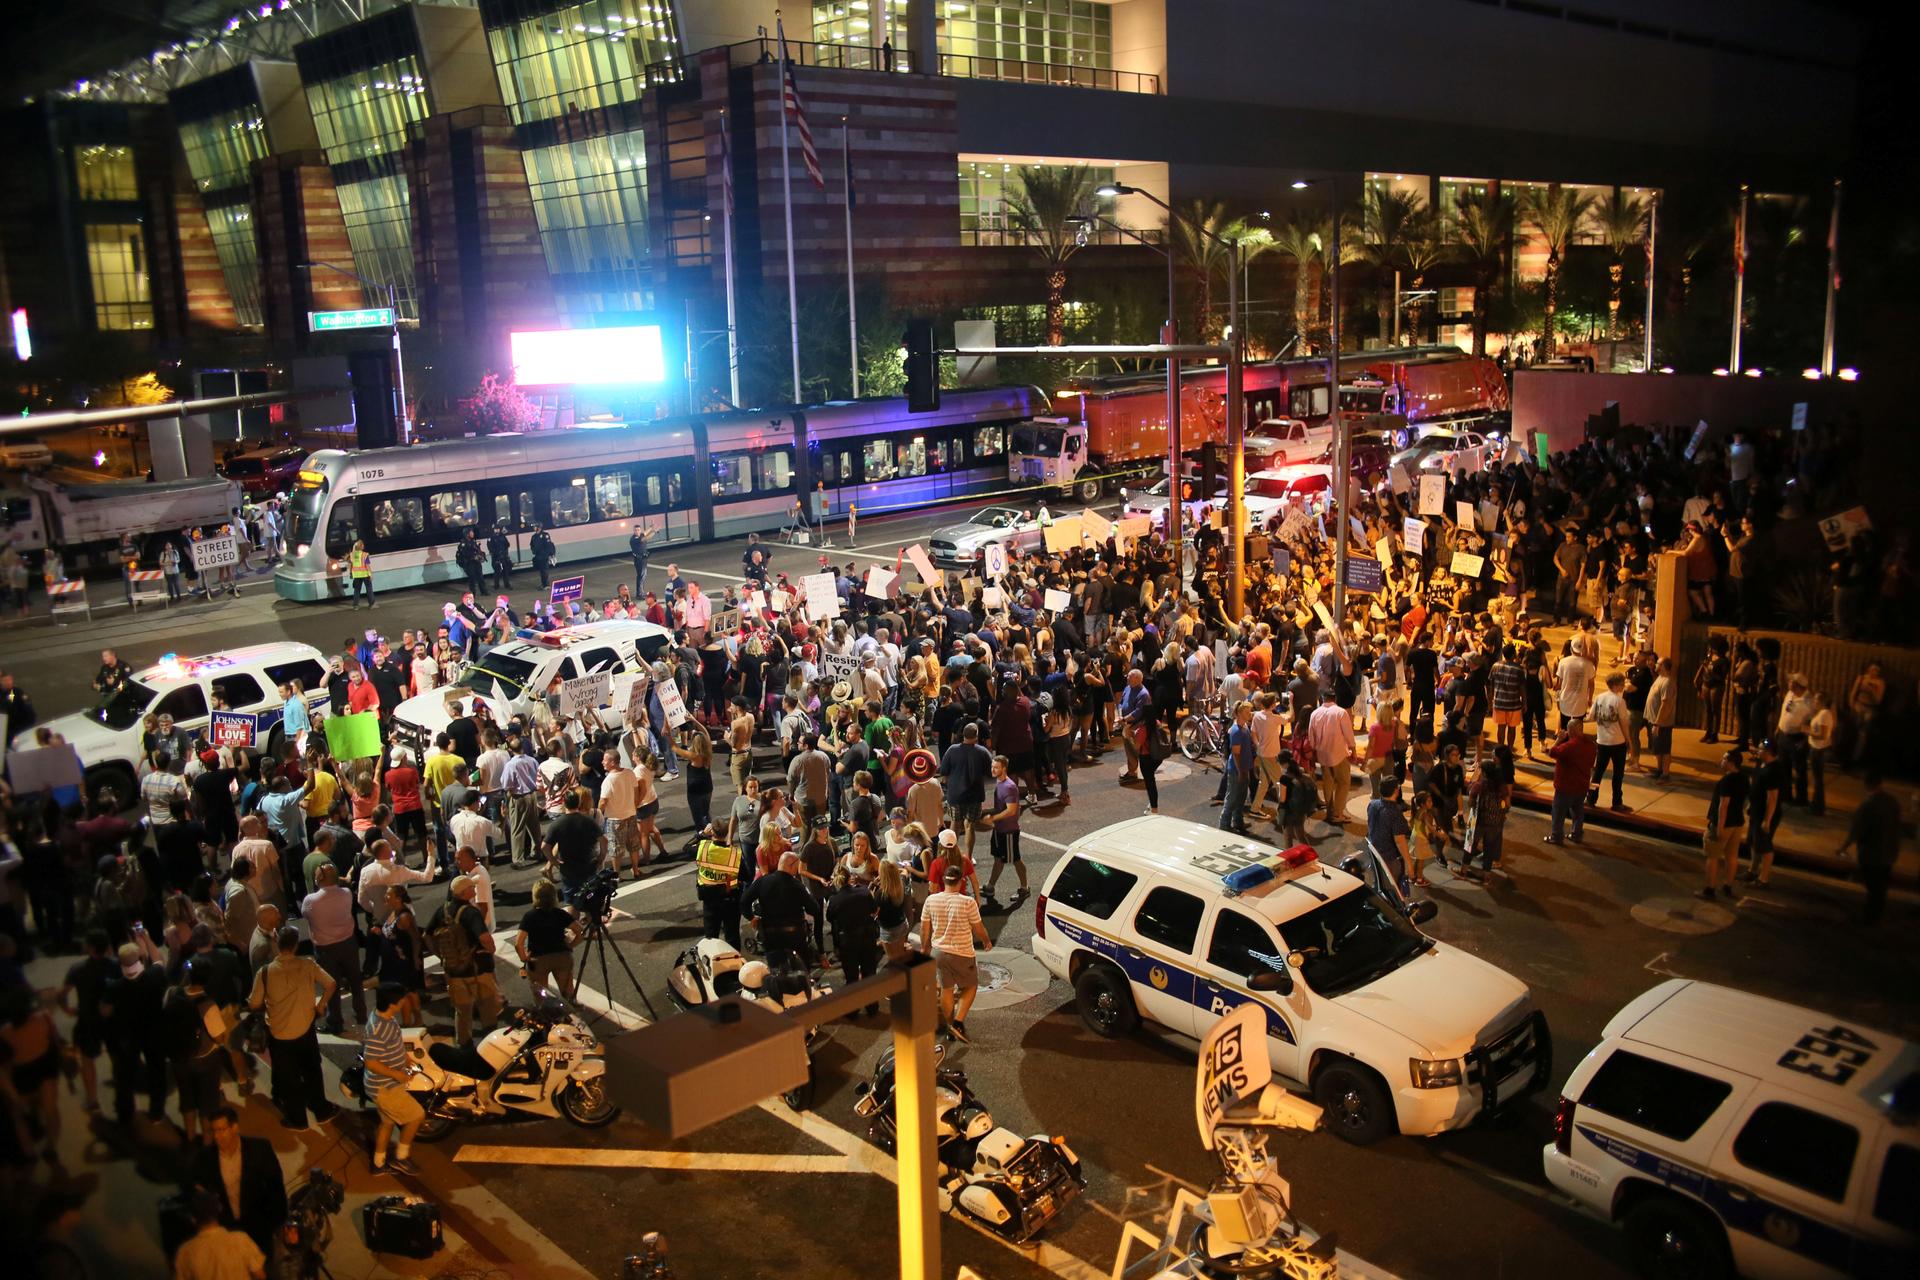 Overhead shot of crowd flanked by police SUVs, evening time